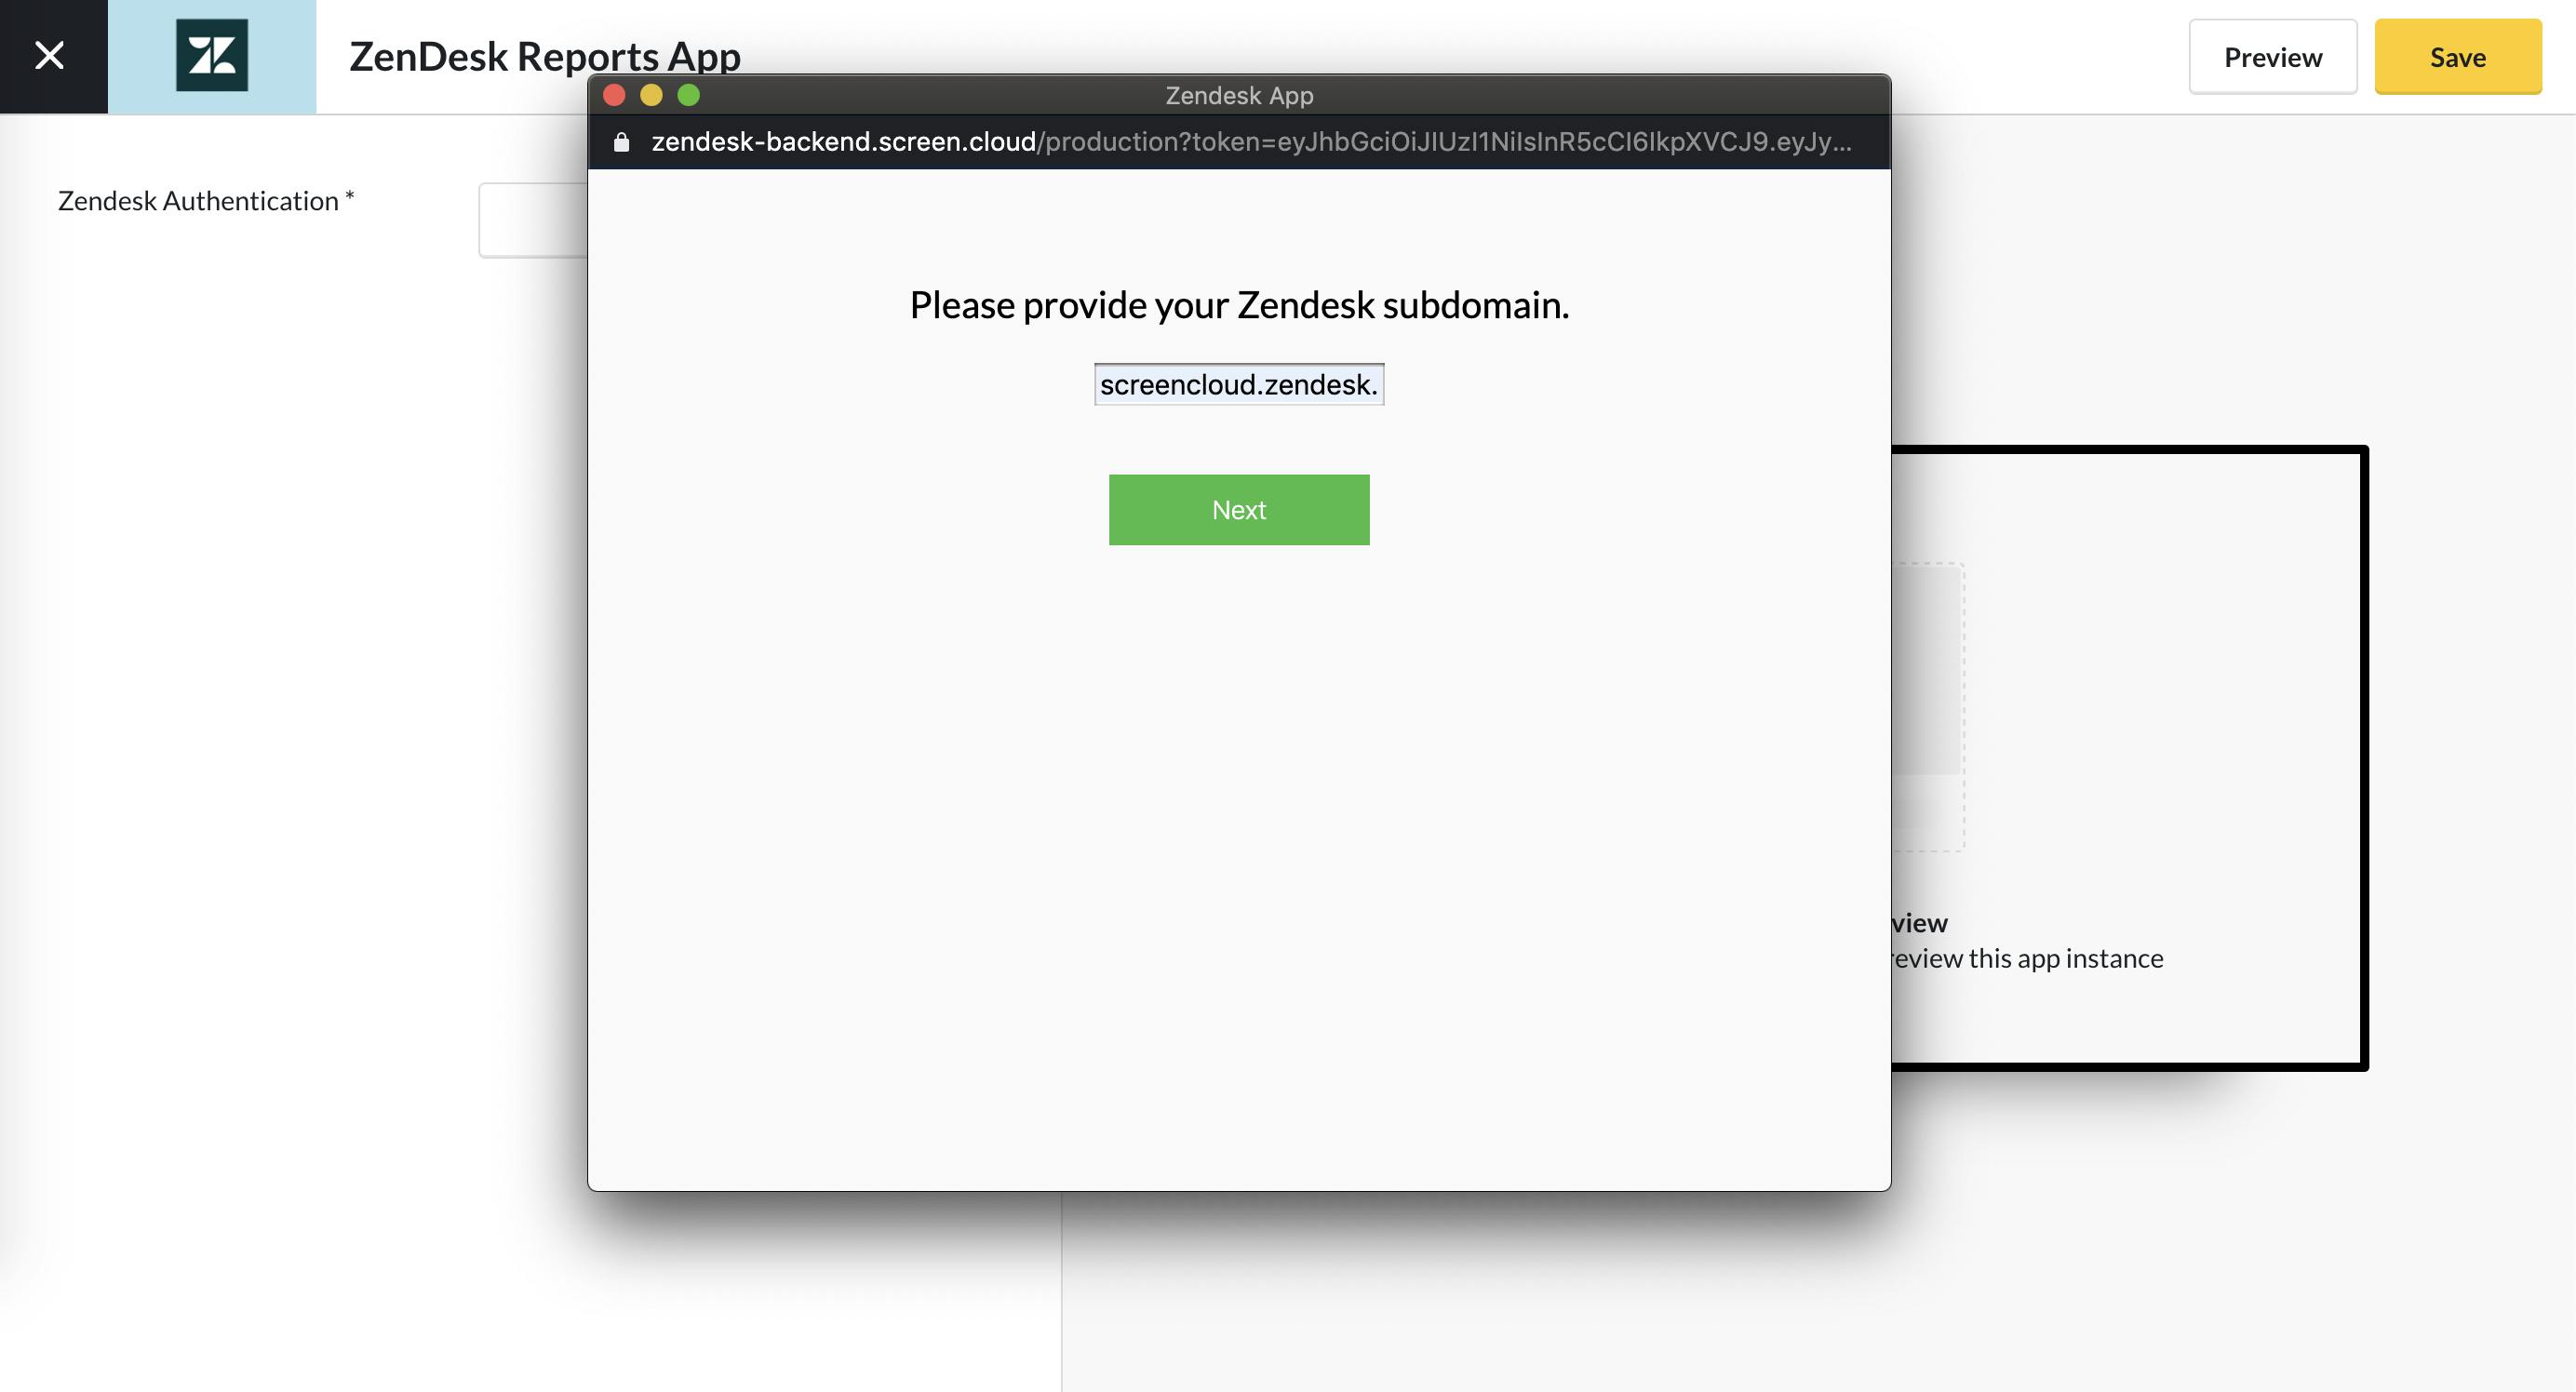 ZenDesk Reports App Guide - Enter domain 5.13.2020.png
